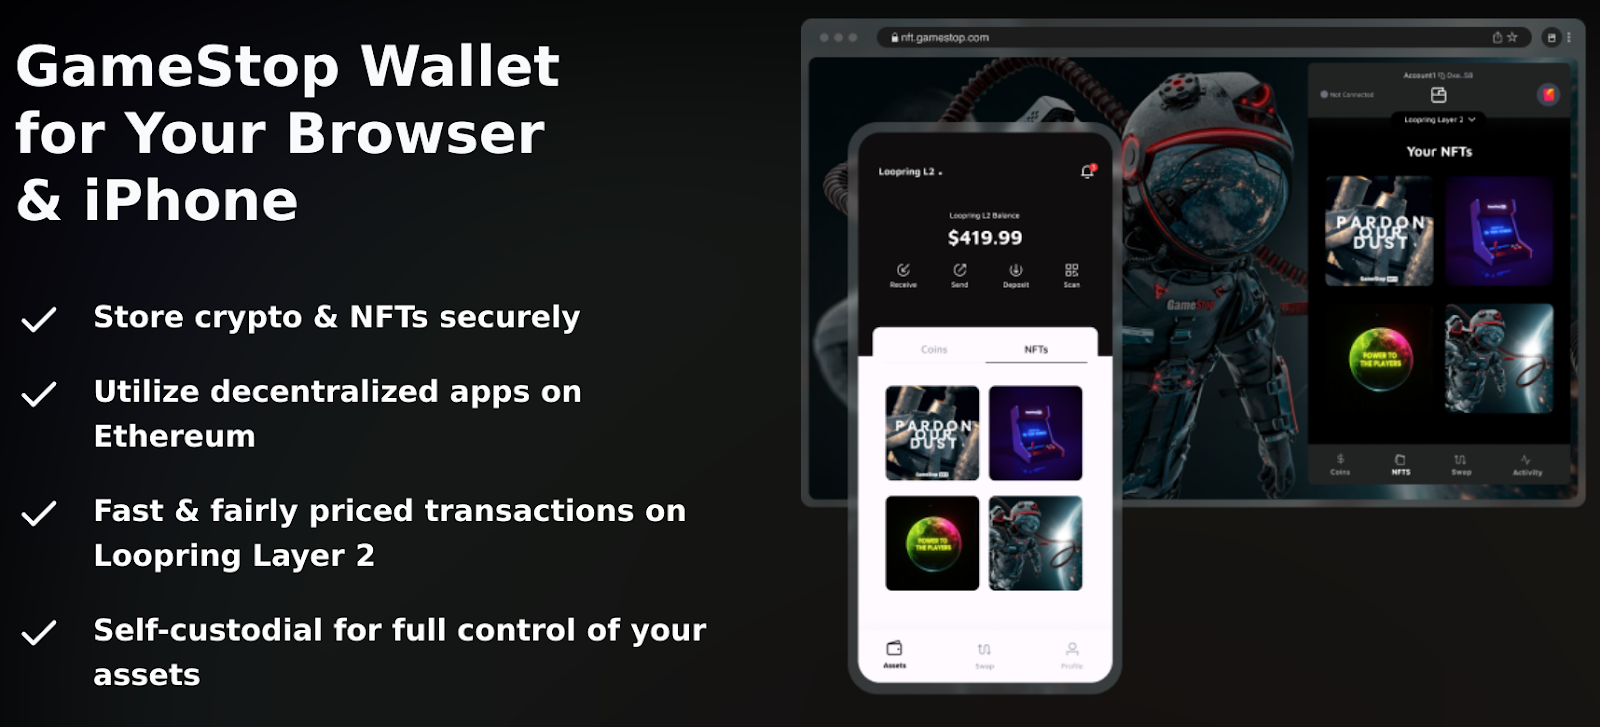 Ethereum wallet announcement site developed by GameStop.  